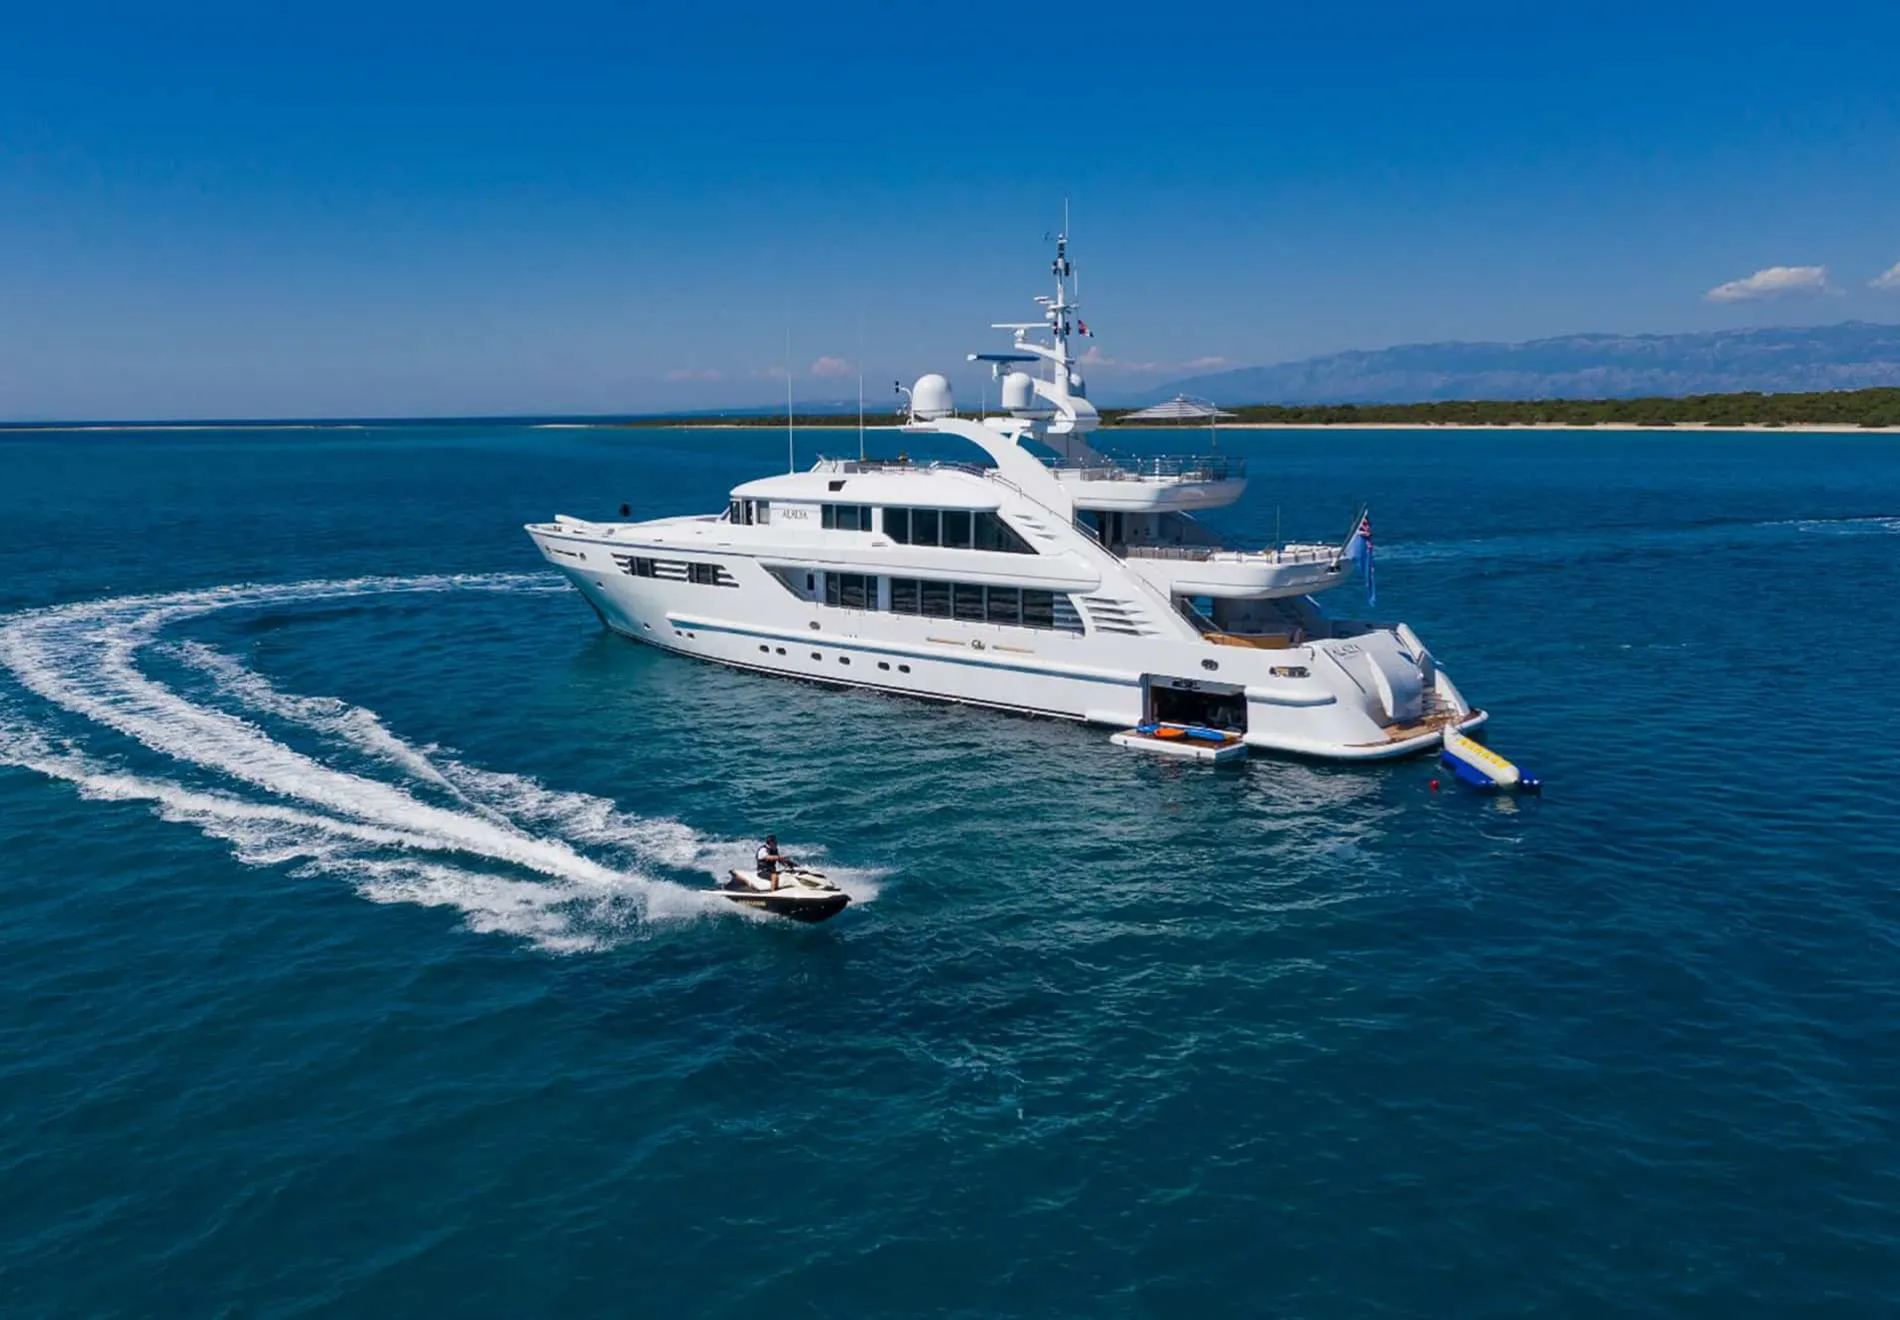 Yacht charter for more than 100000 per week